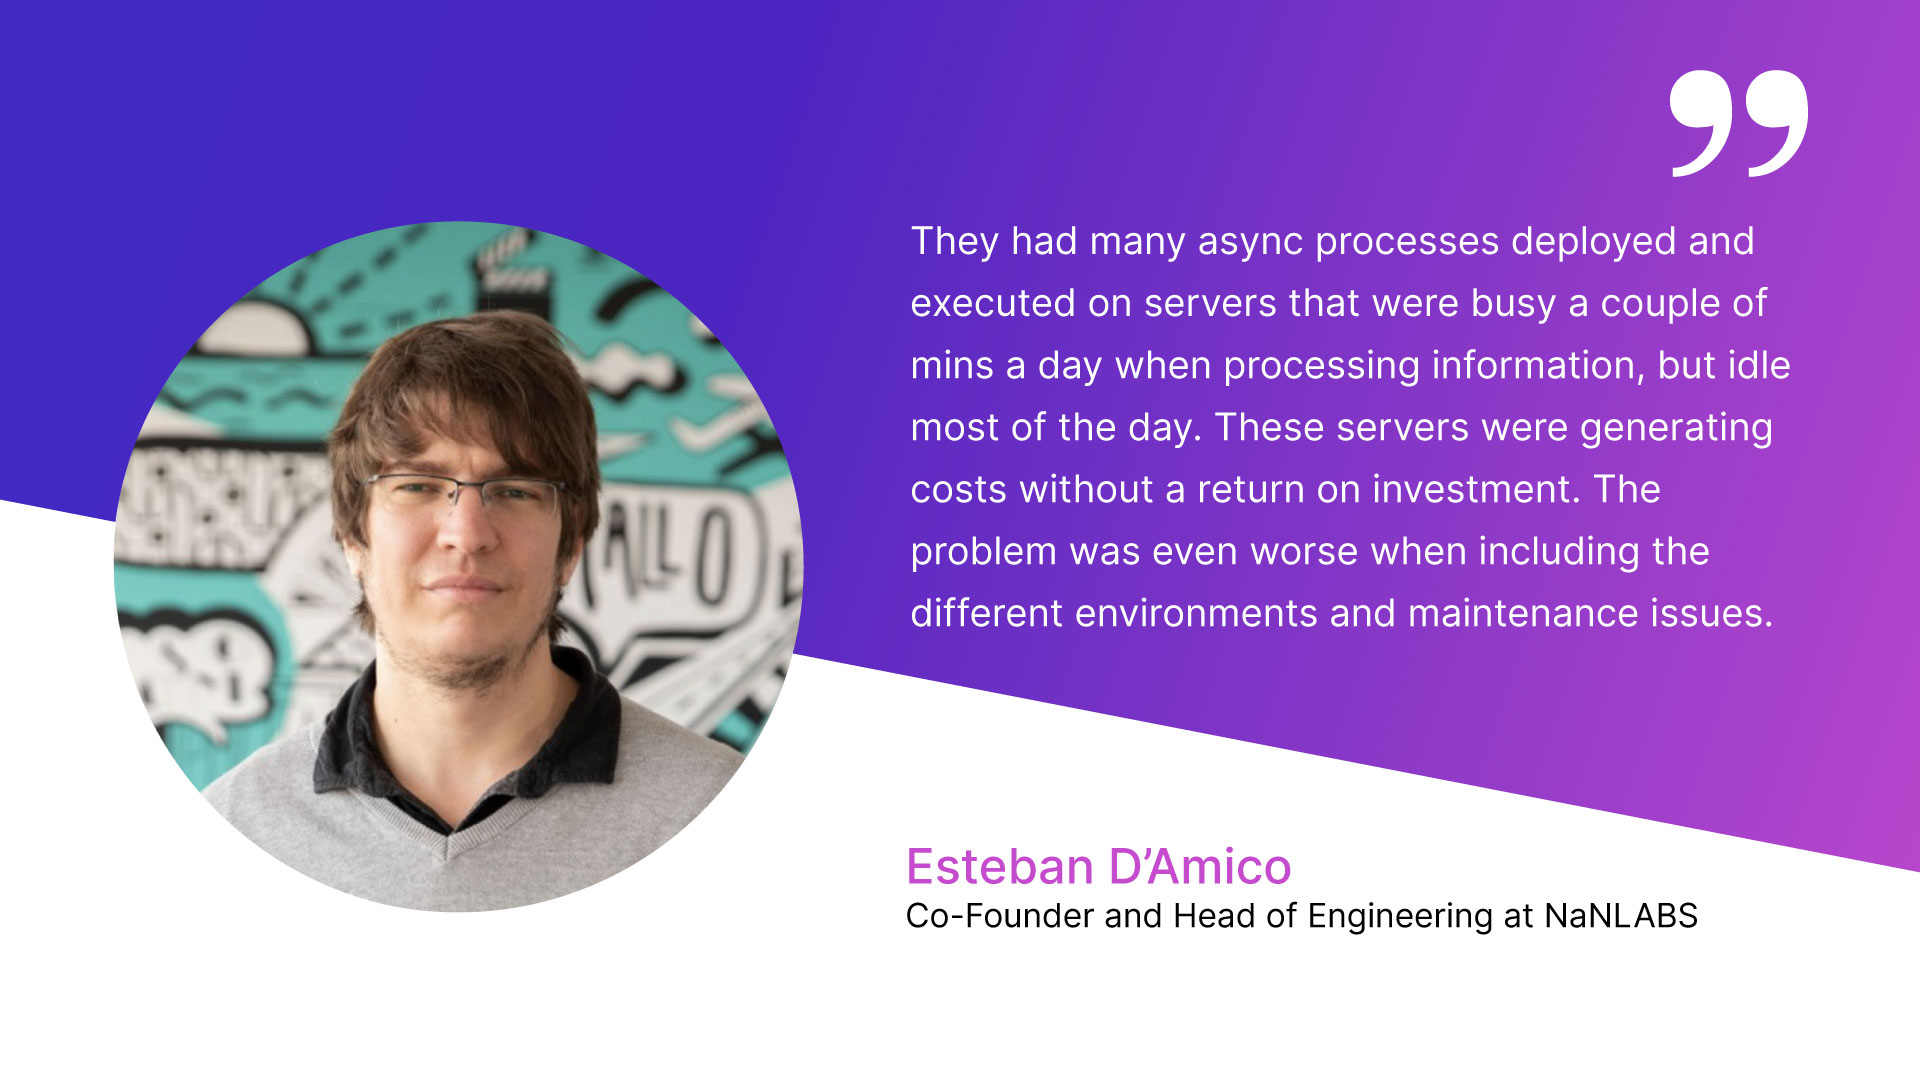 Quote by NaNLABS Co-Founder and Head of Engineering